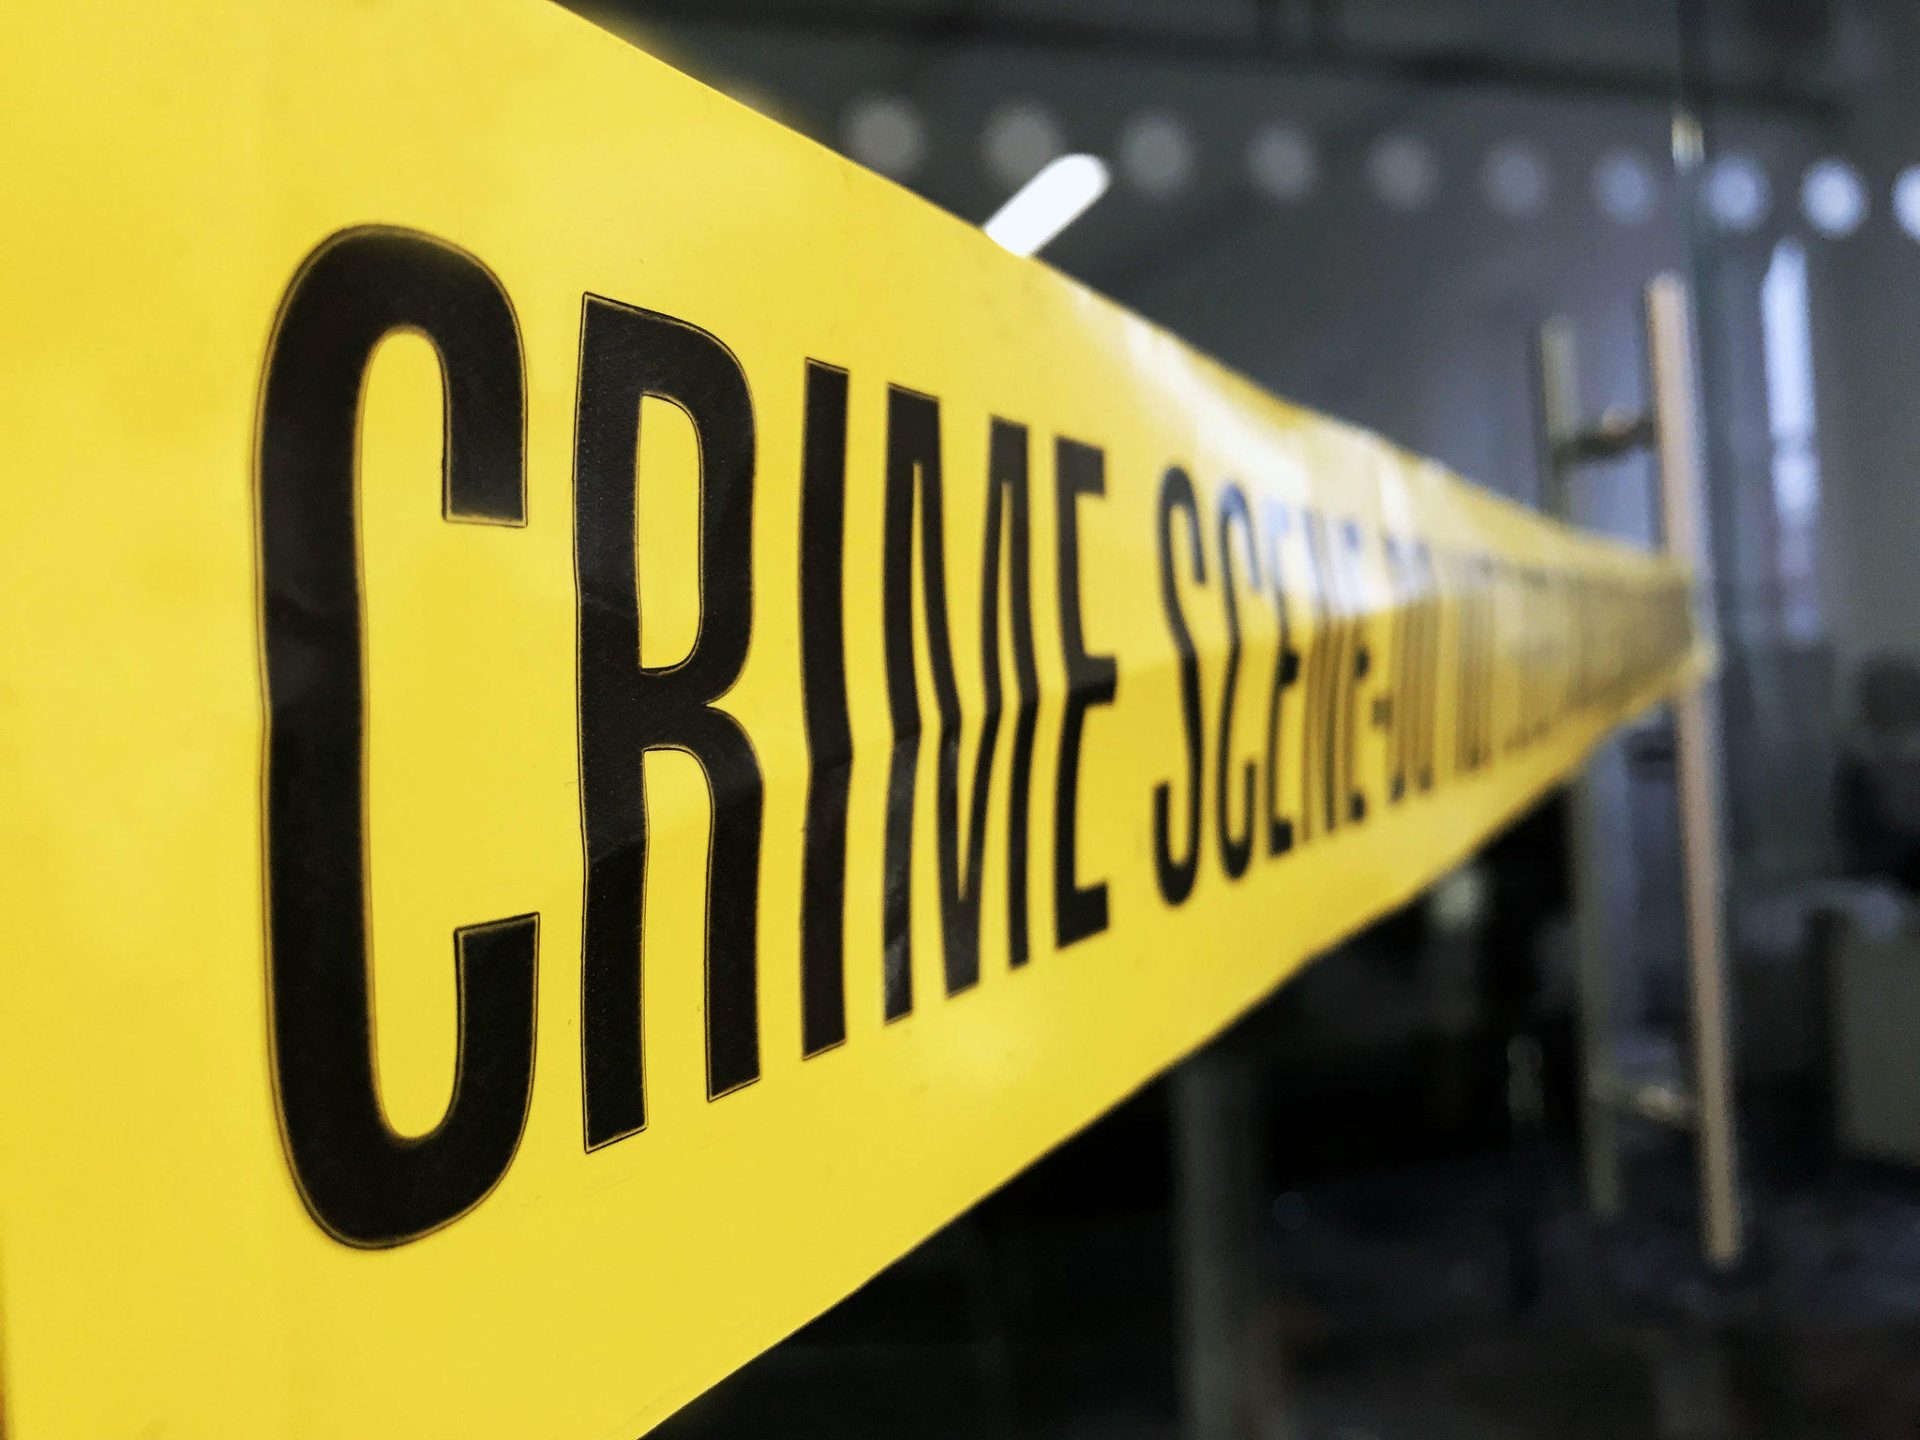 A youngman’s body found dumped in a Kisii market